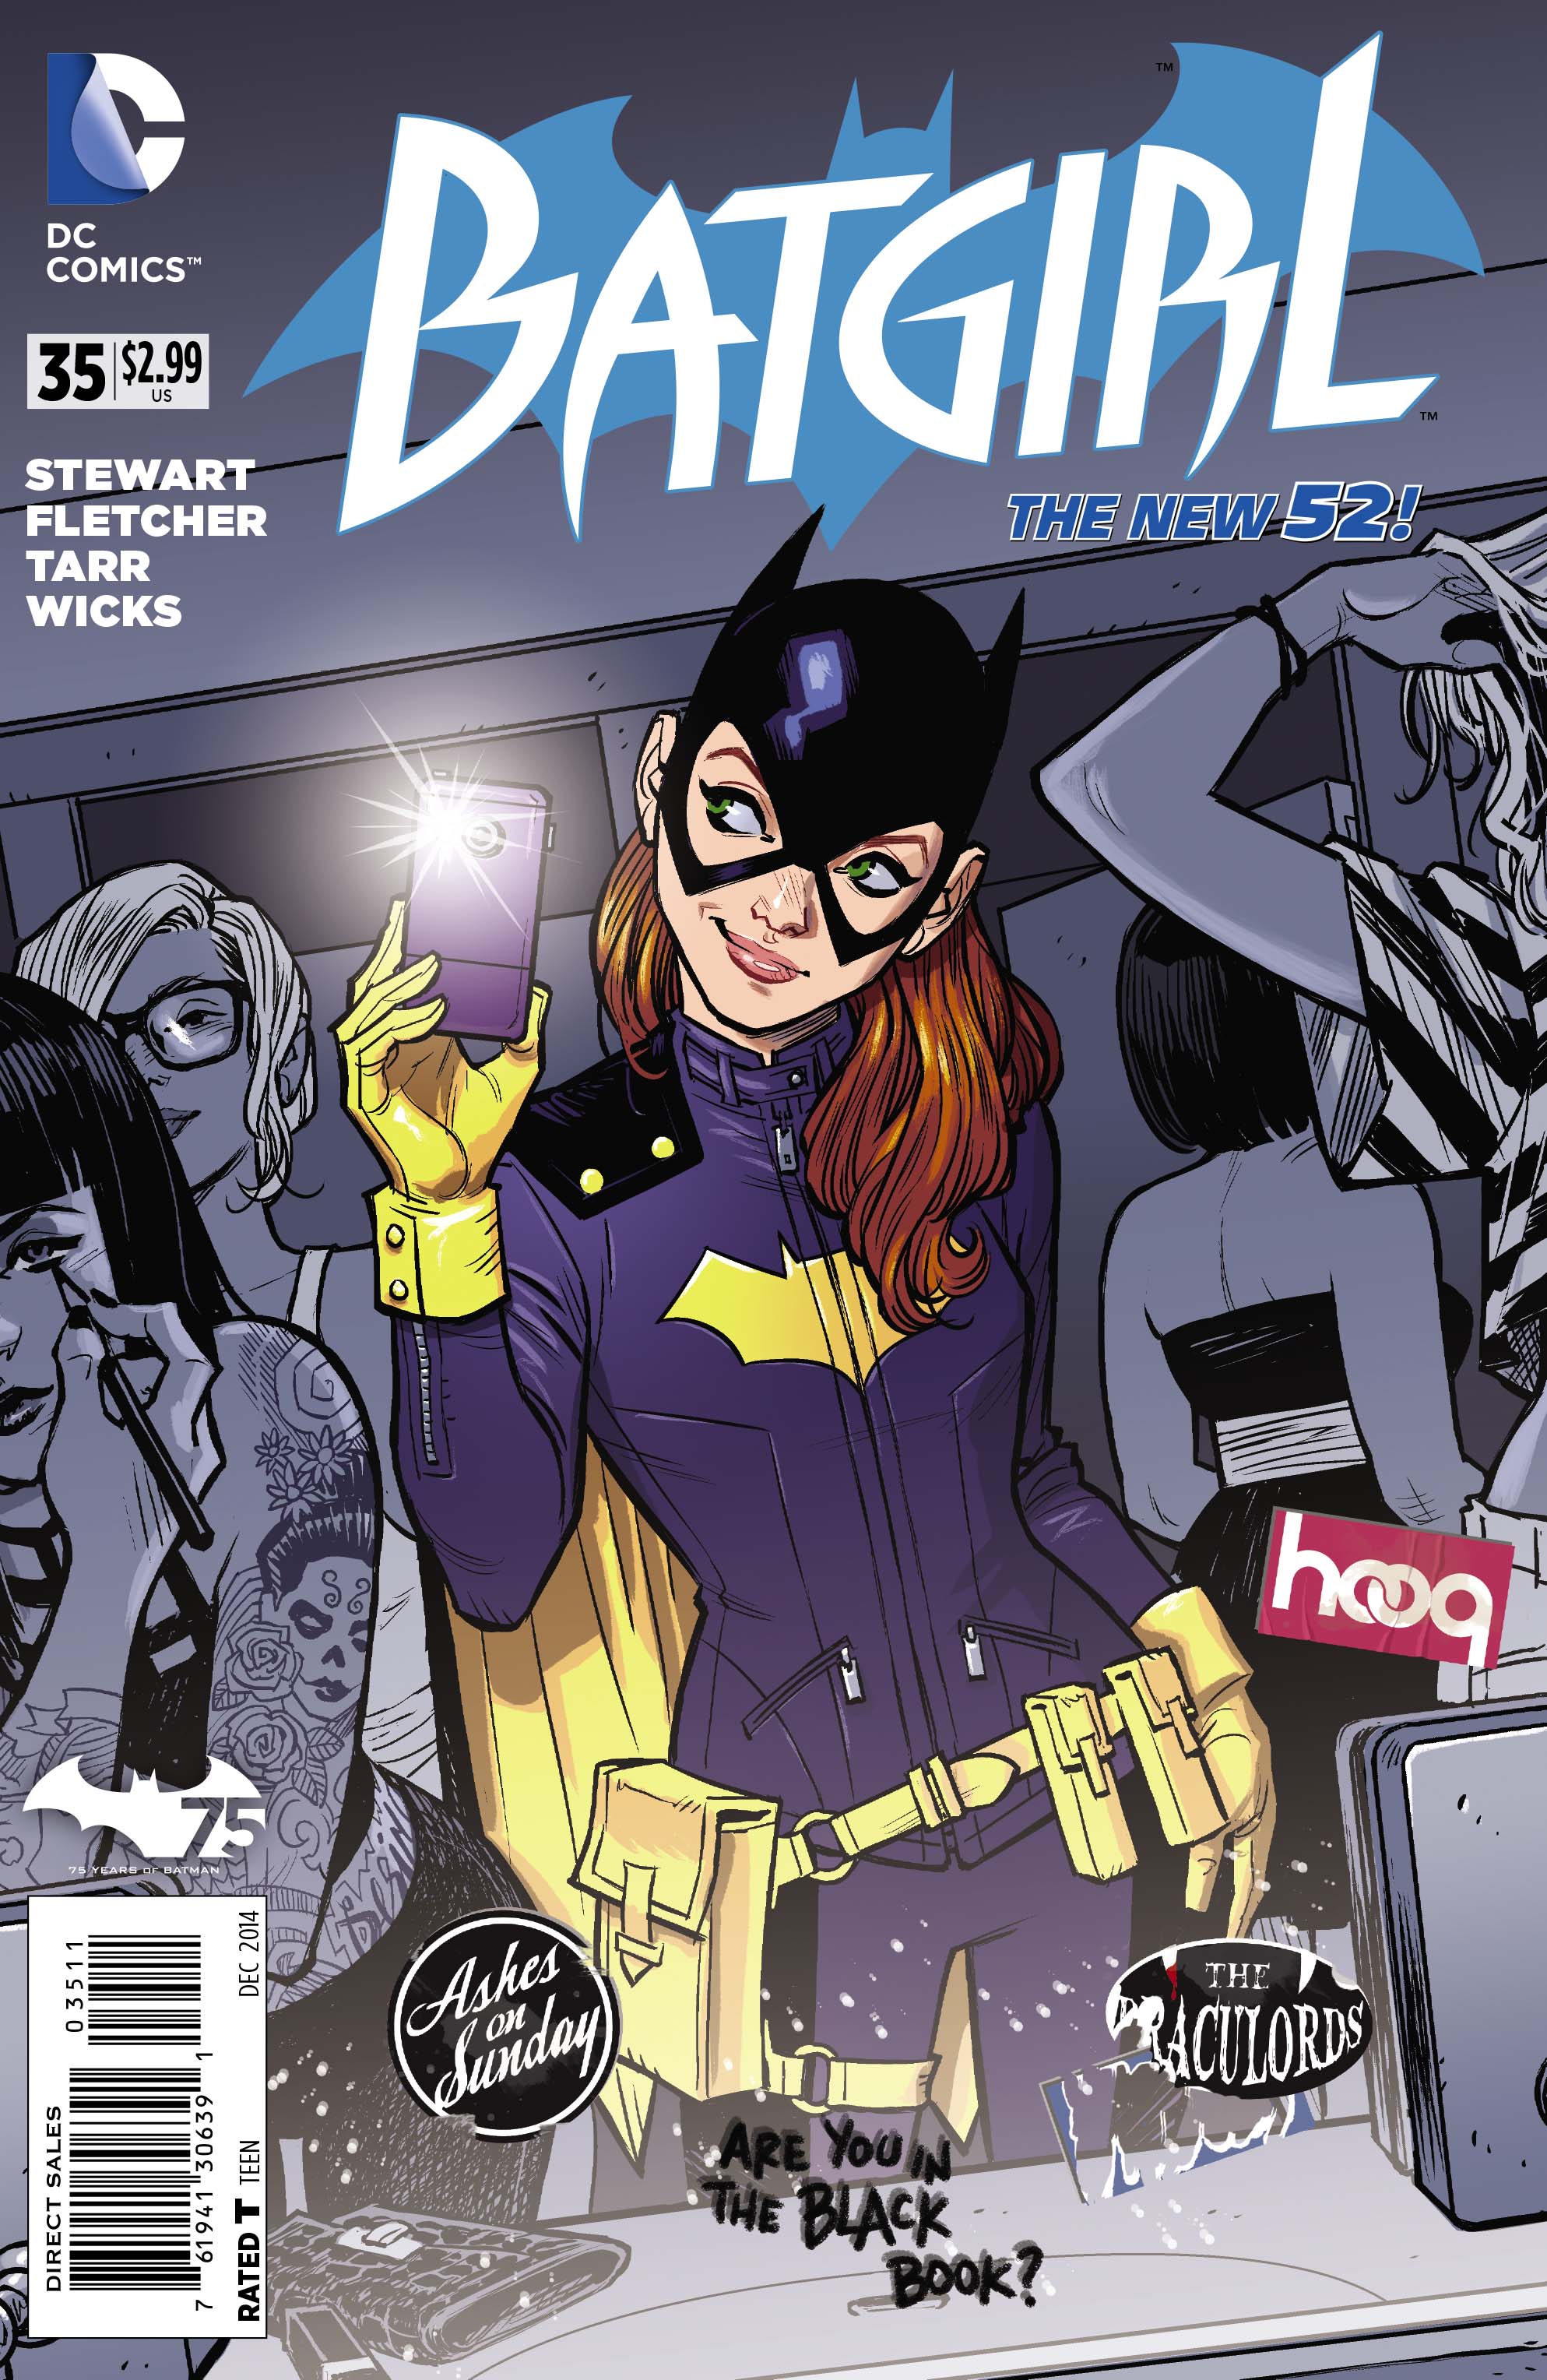 DC's revamped Batgirl embraces social media and reflects 21st century youth culture